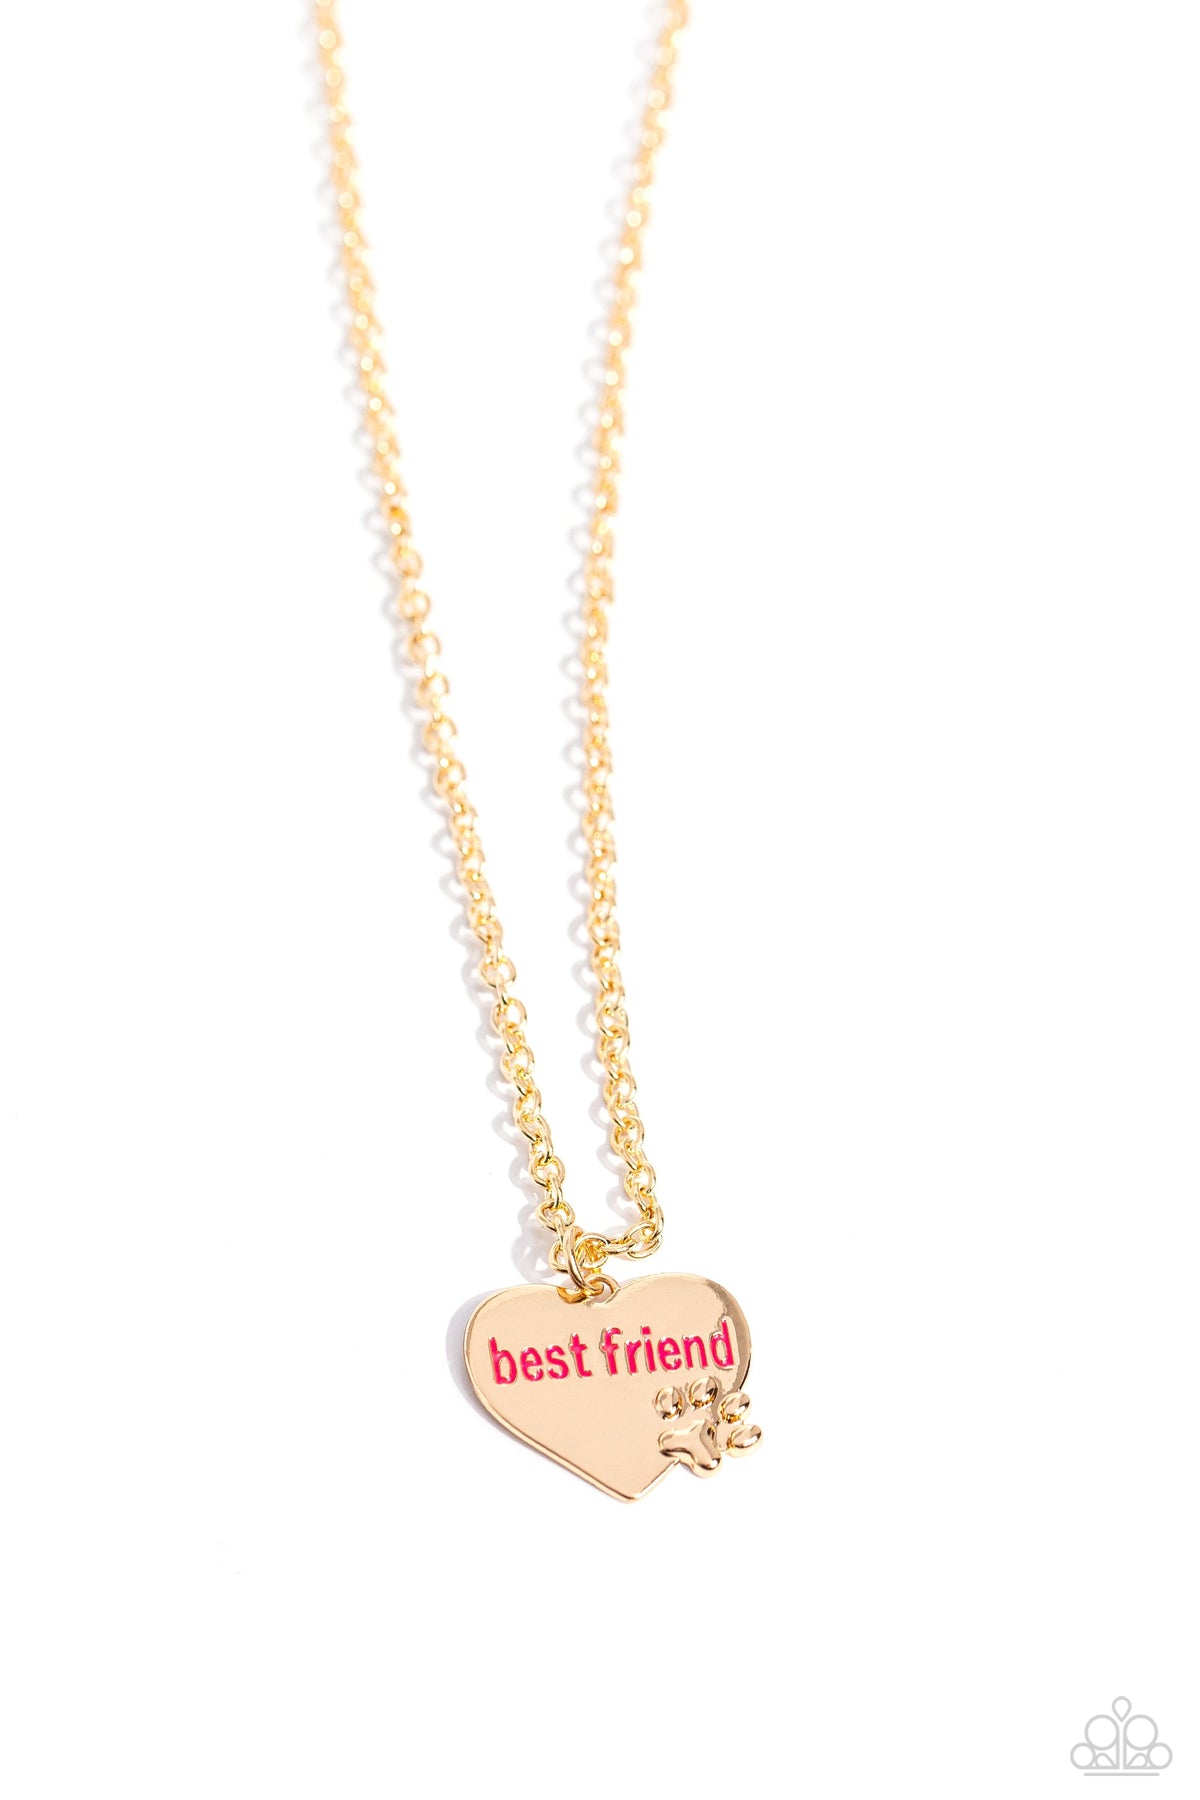 Mans Best Friend Gold Paw Print Necklace - Paparazzi Accessories- lightbox - CarasShop.com - $5 Jewelry by Cara Jewels